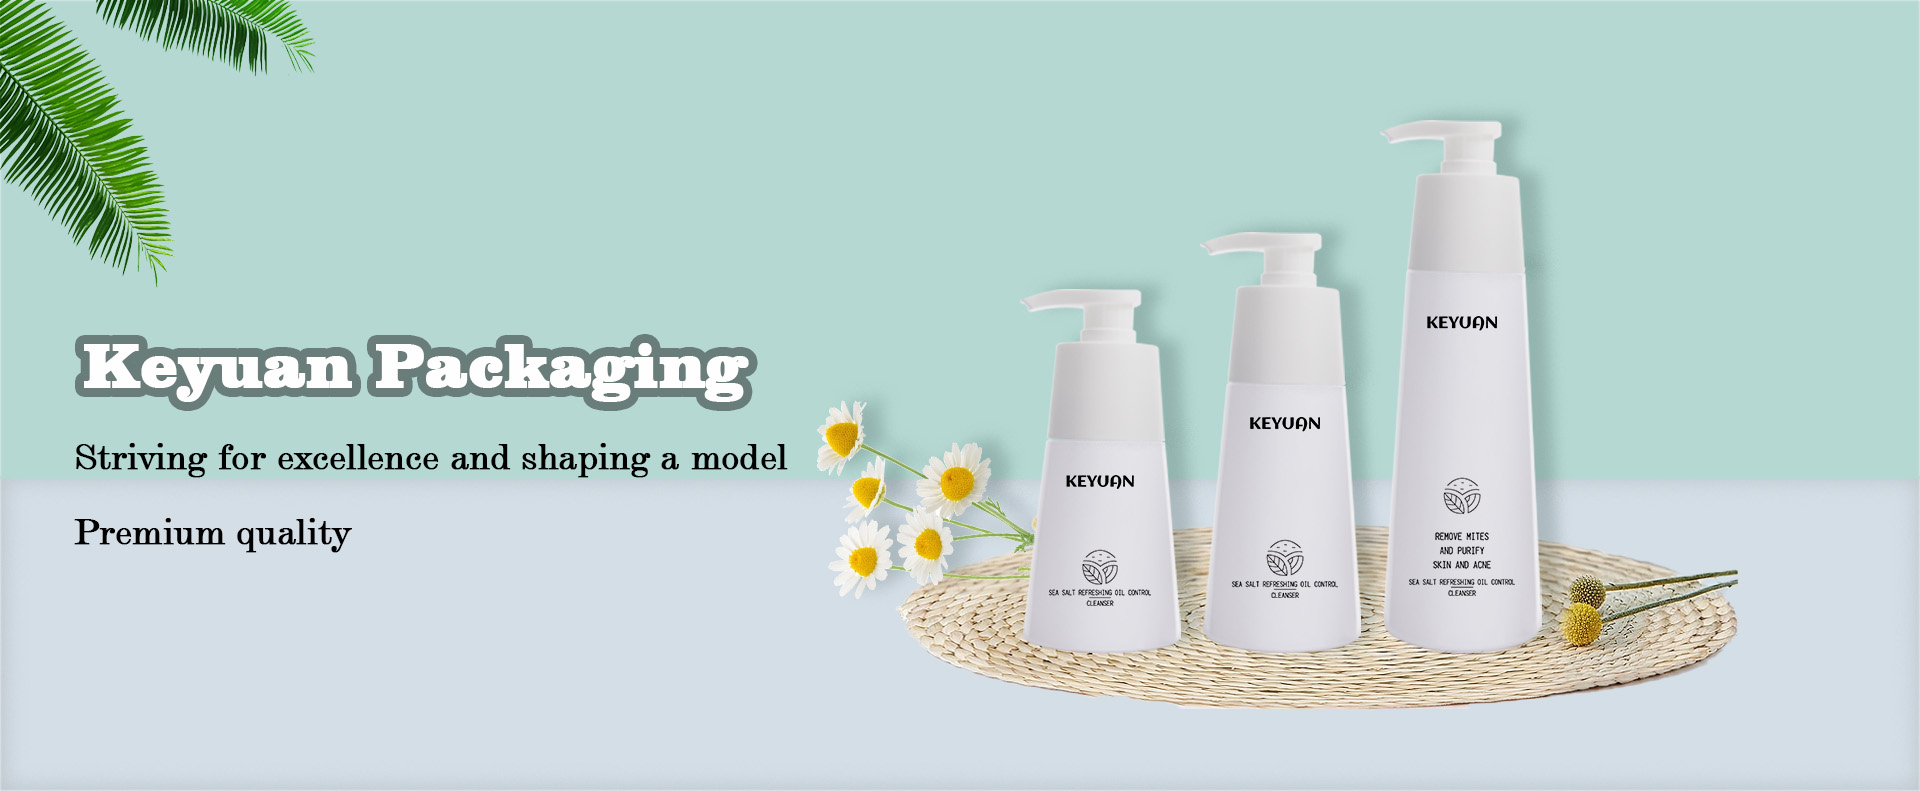 KY206 Wholesale New Design Cosmetic 220ml 300ml 500ml PET Plastic Bottle with Lotion Pump for Shampoo Packaging